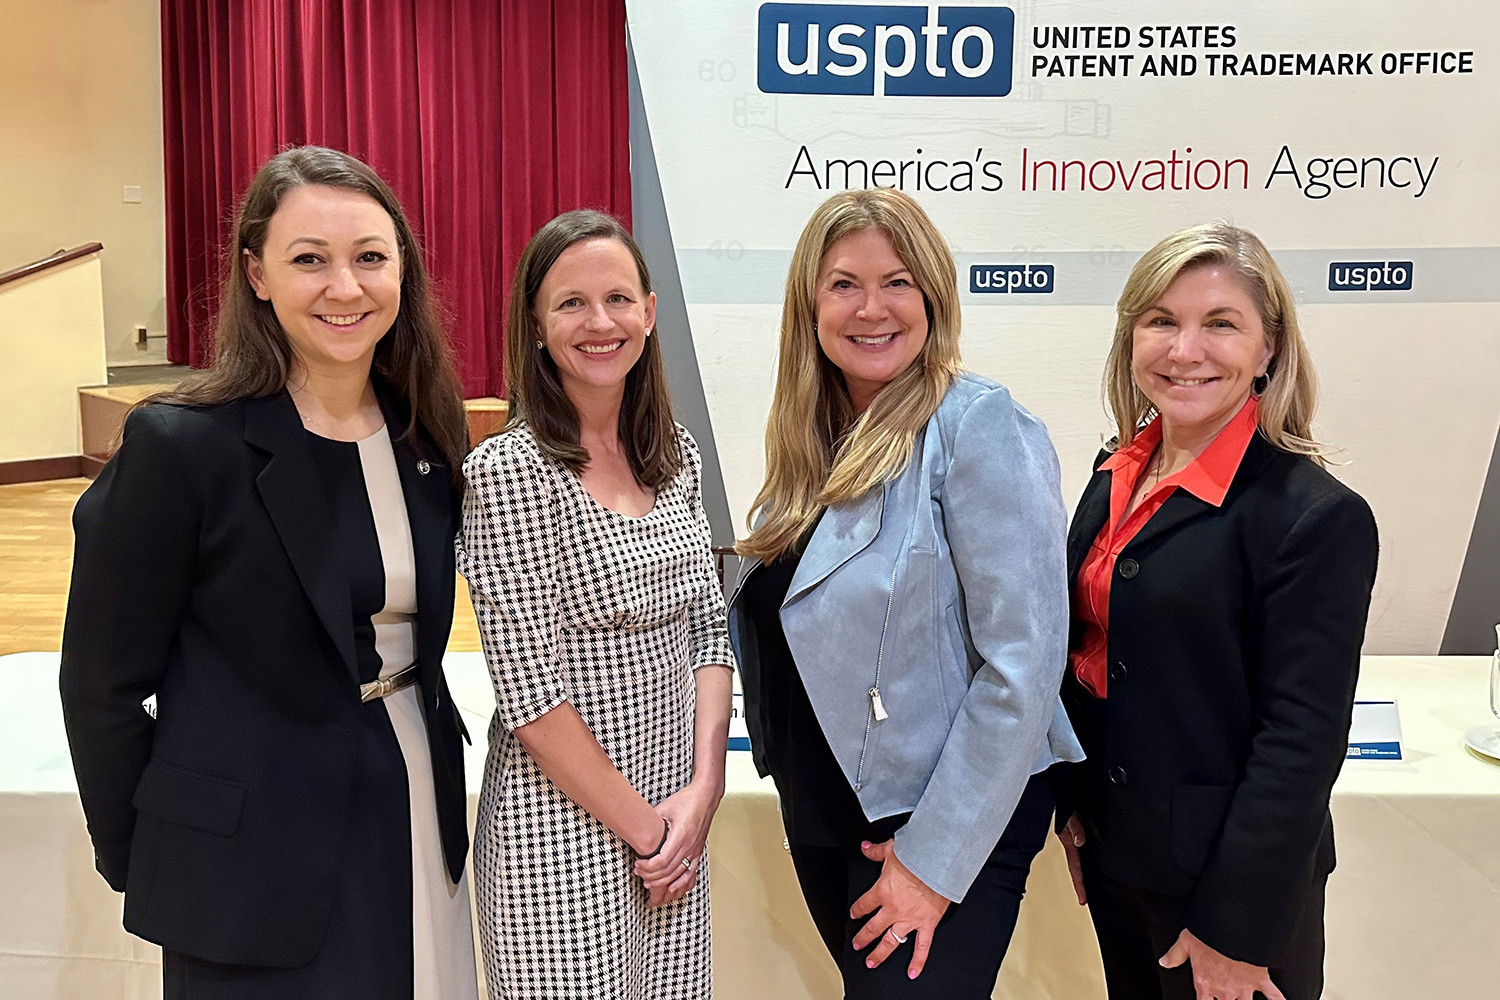 From left to right, Major Squire with the USPTO’s Janine Scianna, senior adviser to Director Kathi Vidal; Director Vidal; and Mary Fuller, the Silicon Valley Regional Office’s director, at an Entrepreneurial Essentials event on October 11 at Marine Corps Base Camp Pendleton